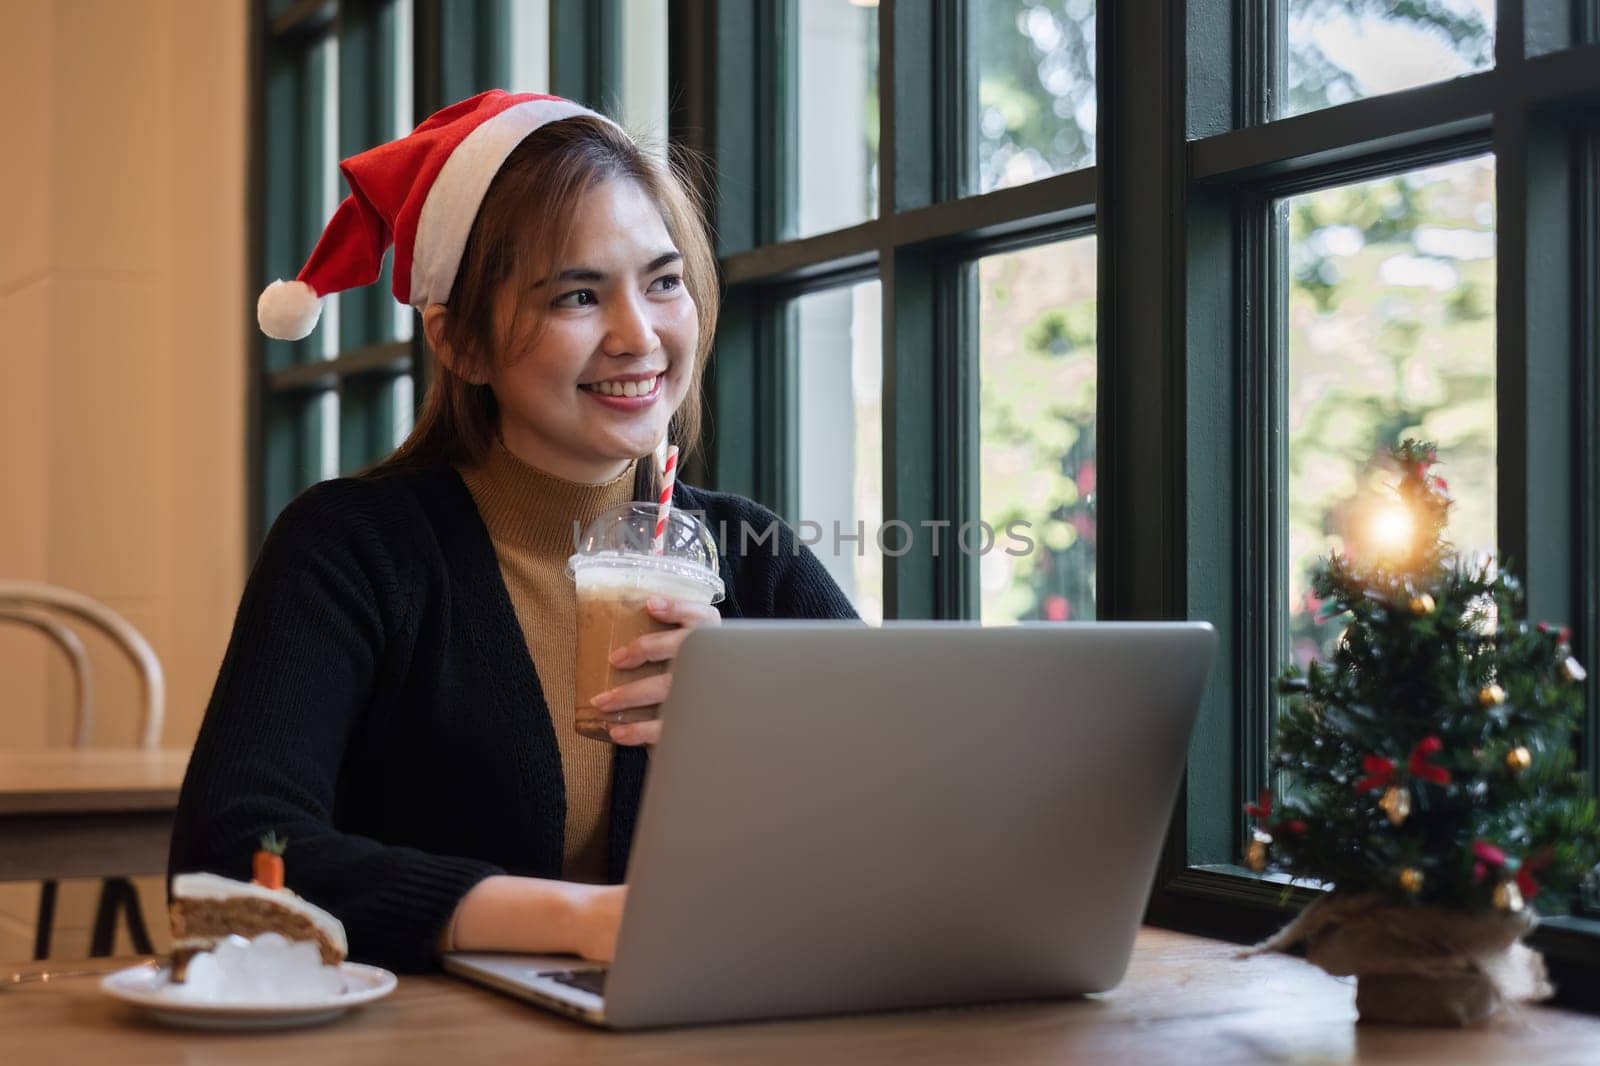 A businesswoman sits and work using a laptop in an office decorated with a Christmas tree and colorful lights during the holiday season. Spend Christmas at work.